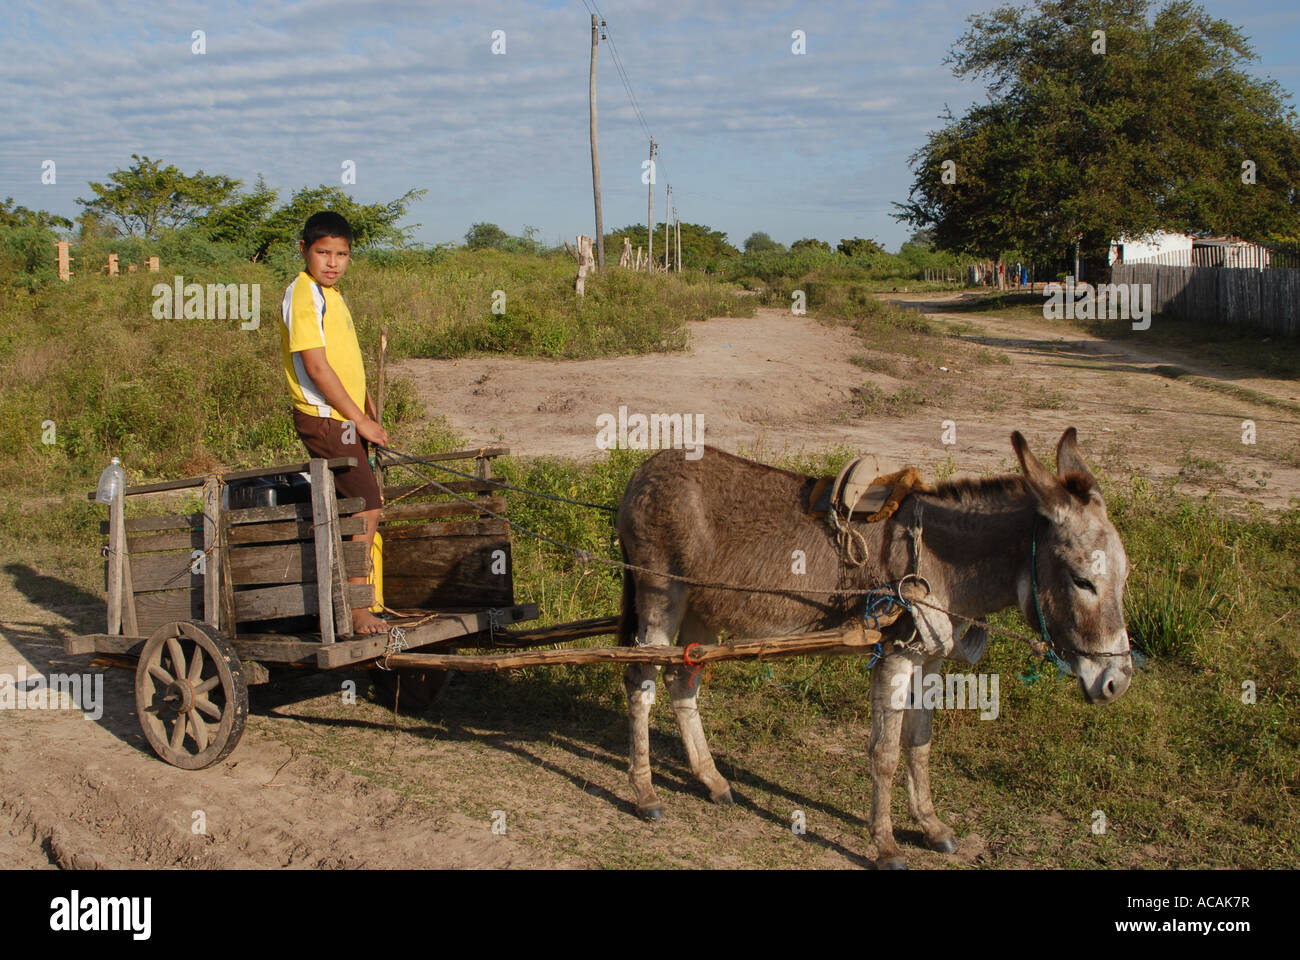 Typical way of transport: boy with donkey cart, Paraguay Stock Photo